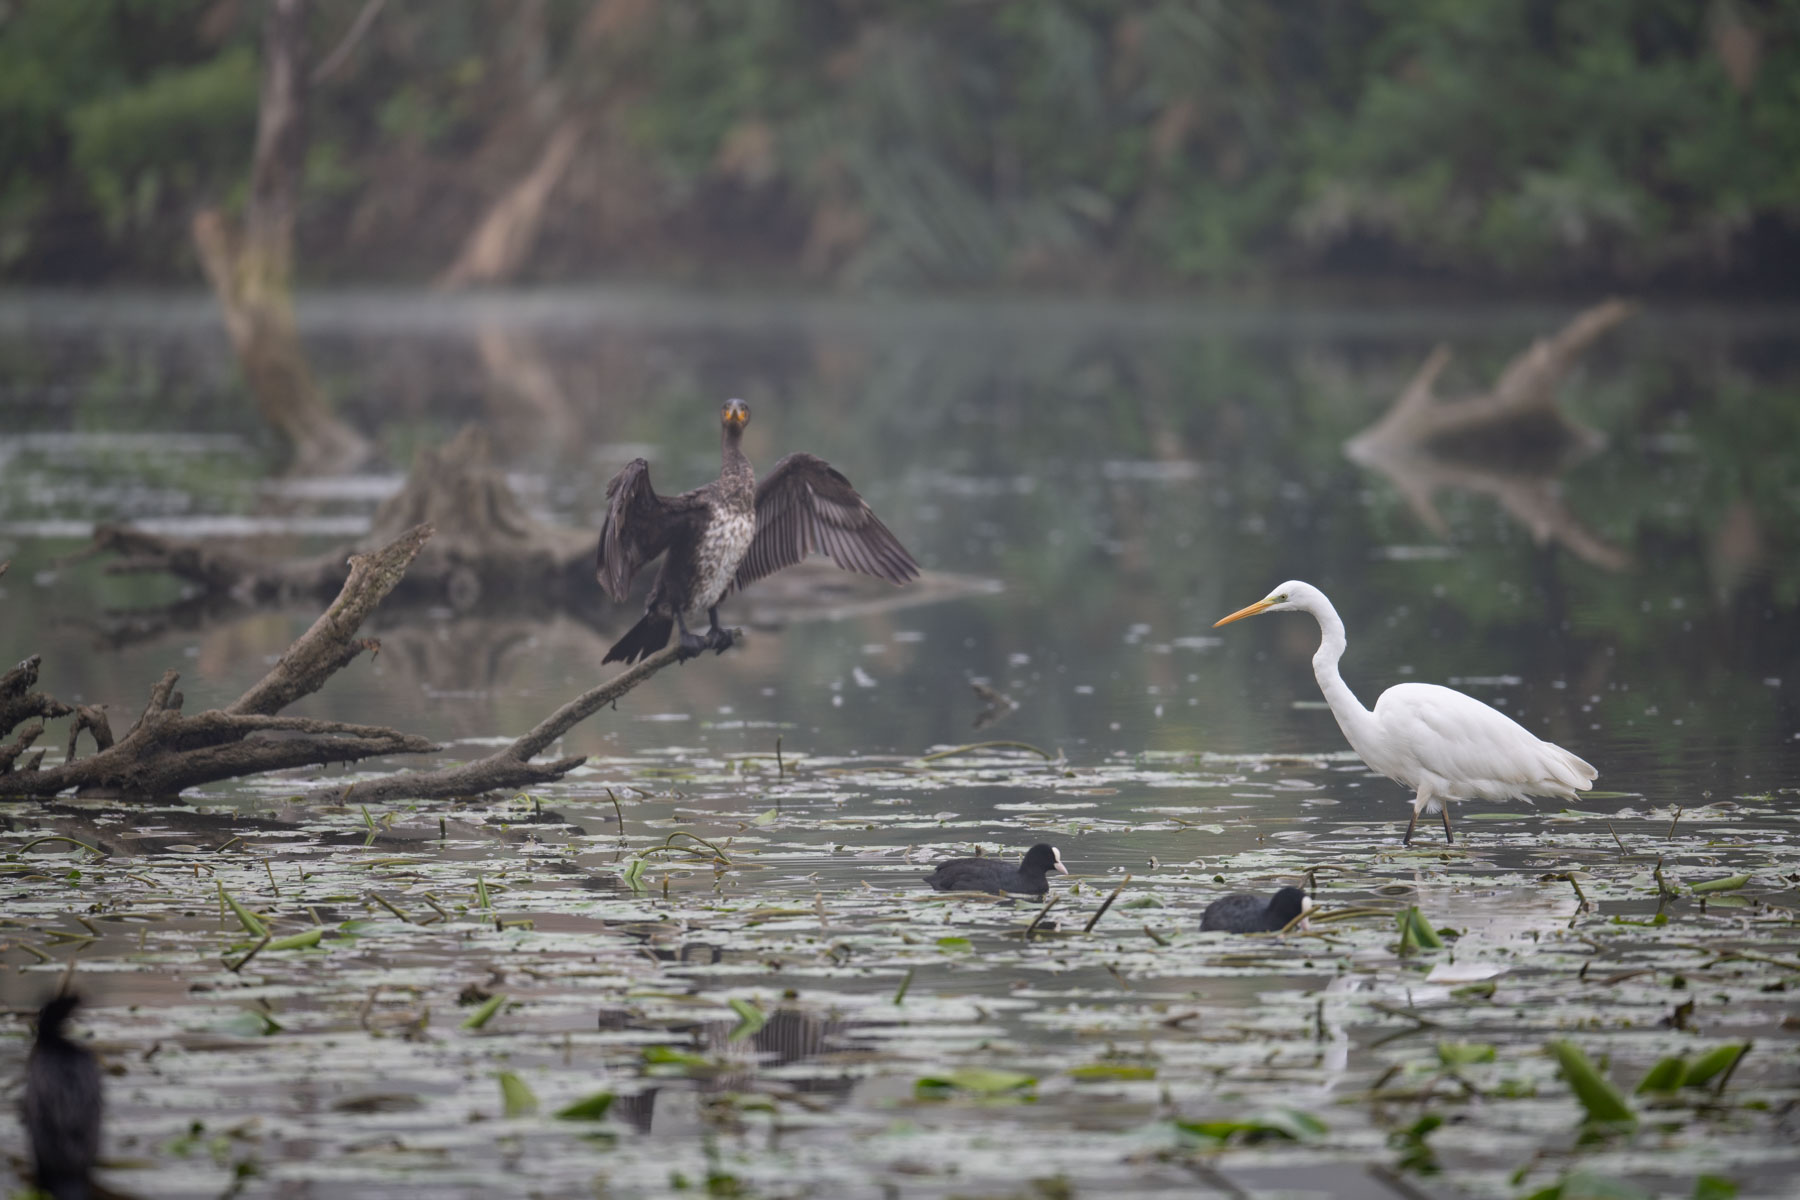 Great white heron and friends...